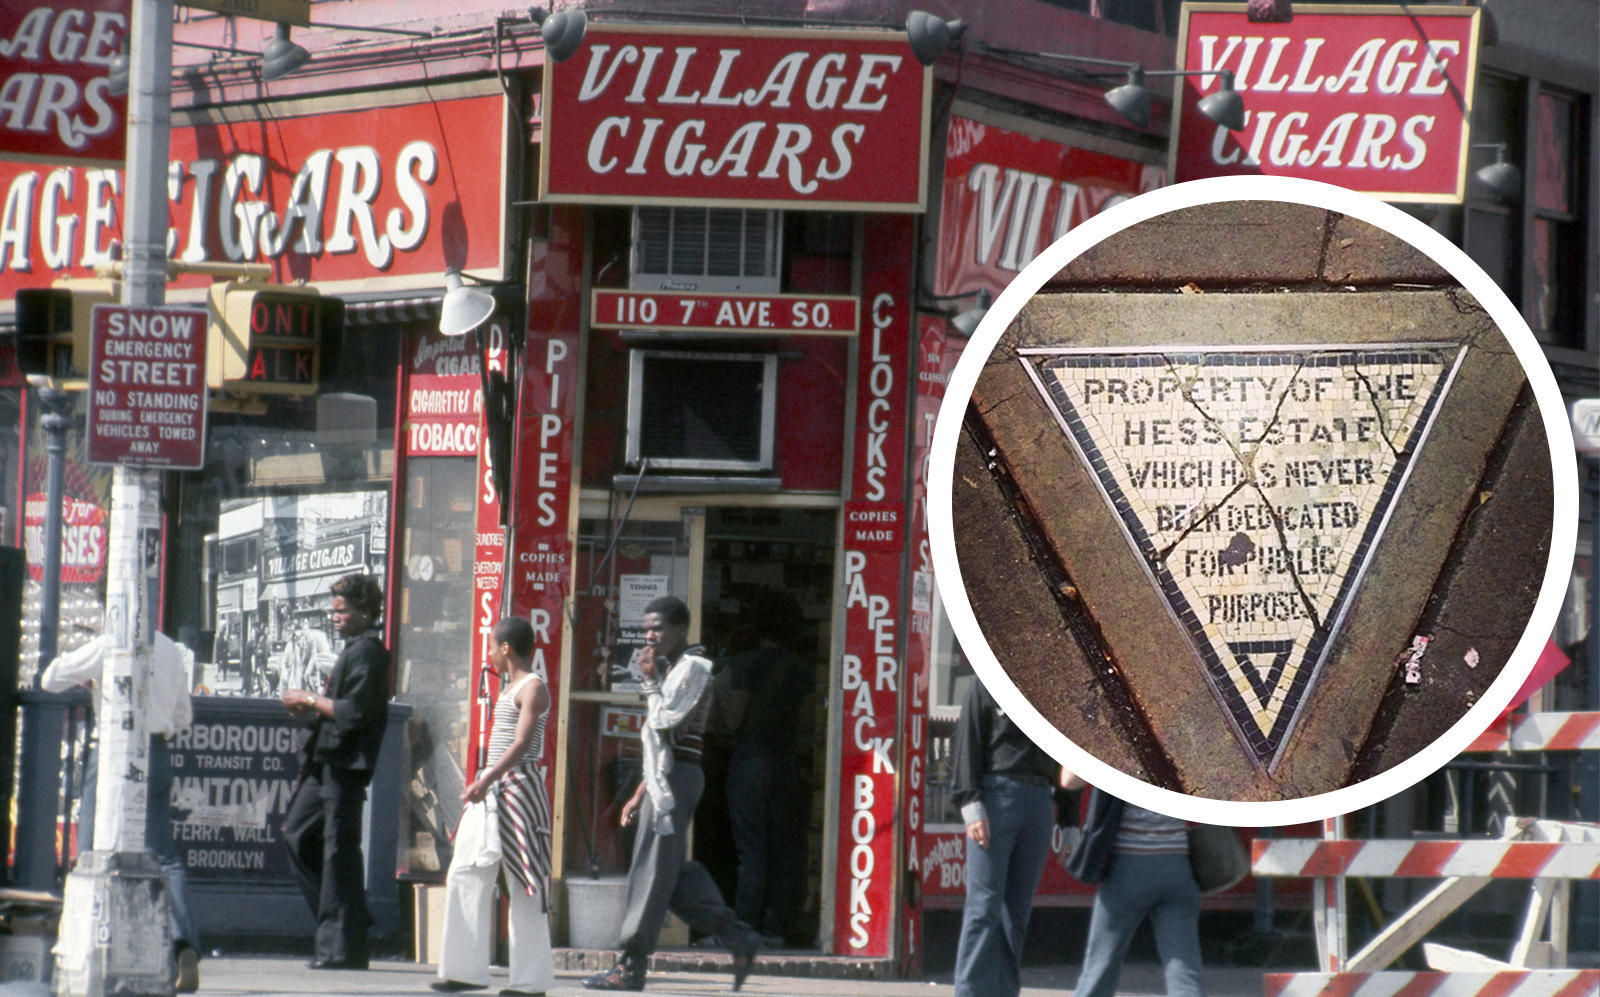 An image of Village Cigars from 1976 pictured with the Hess Triangle. (Getty, WikiMedia)